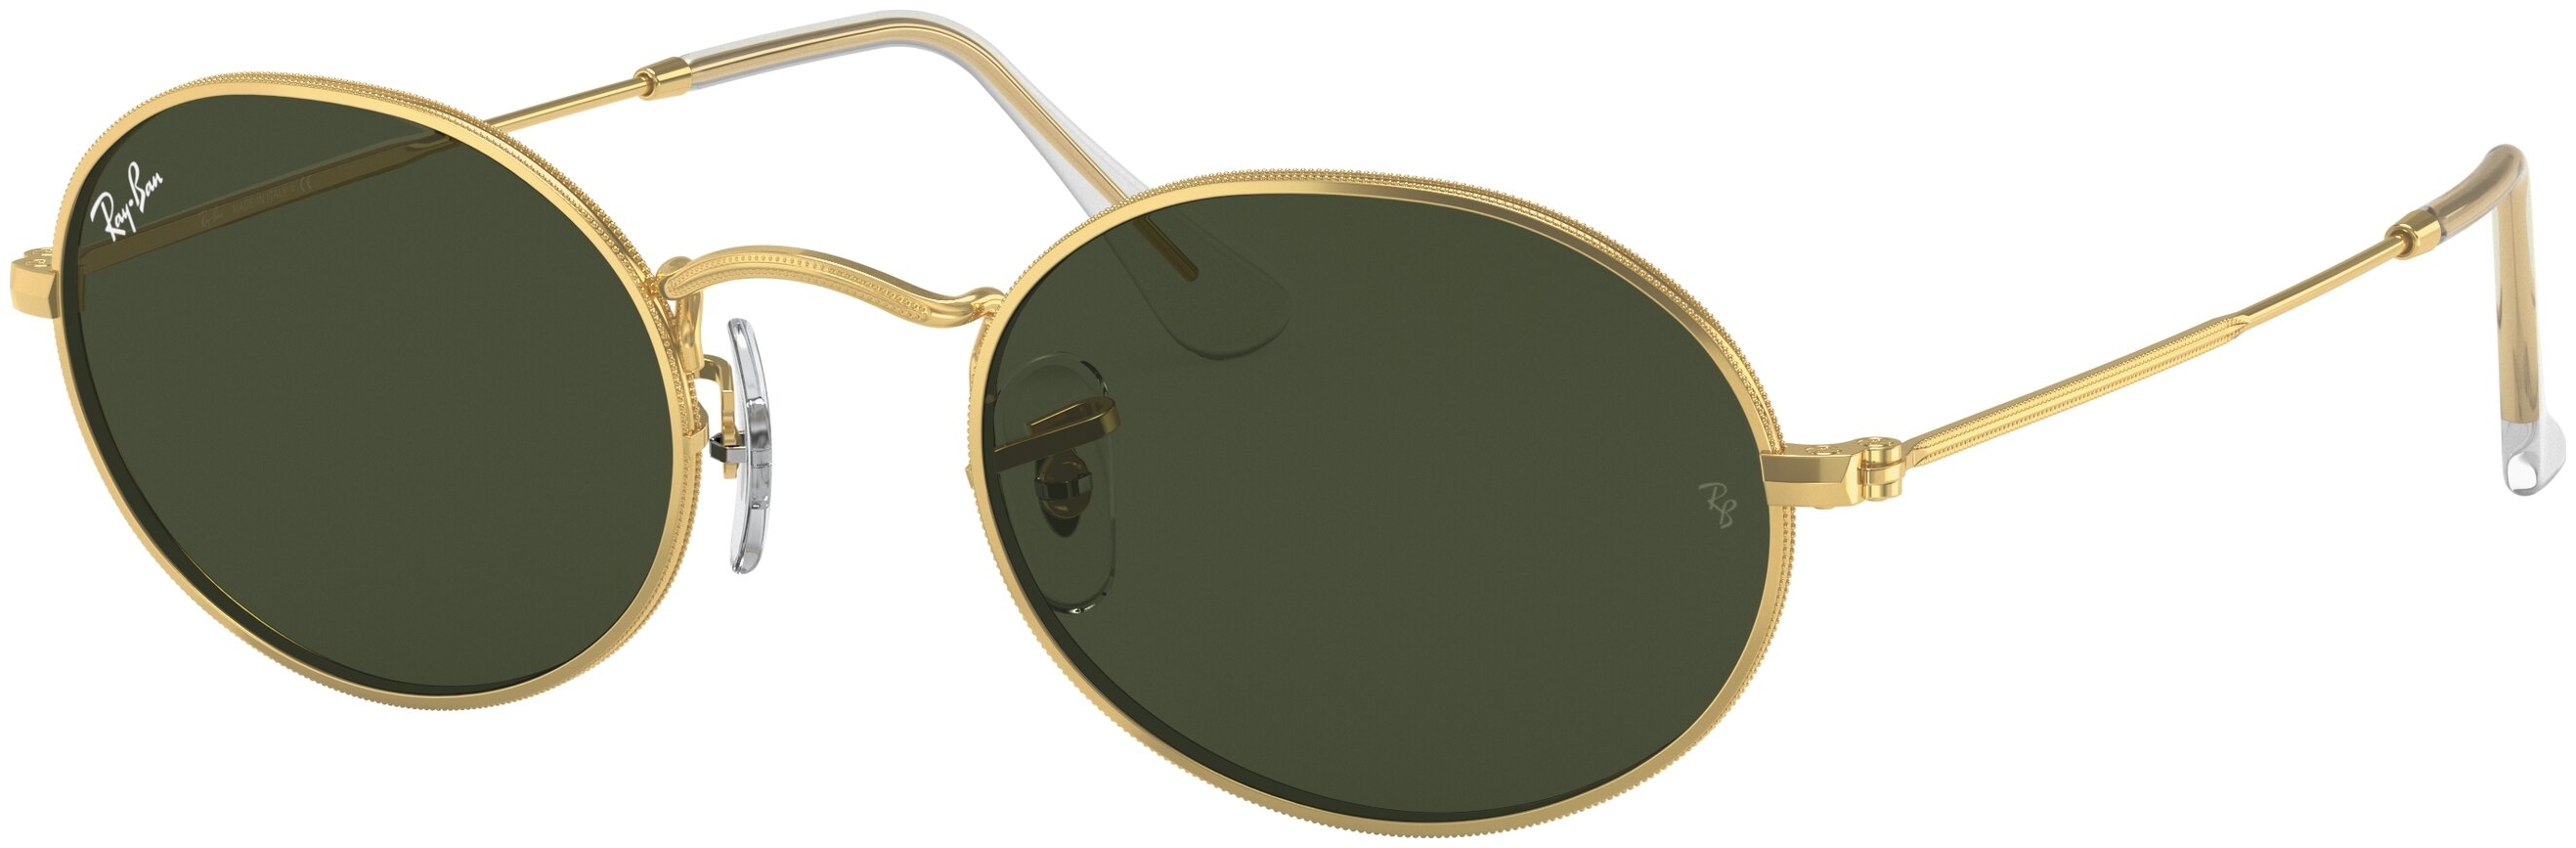  Ray-Ban  RB3547 919631 OVAL